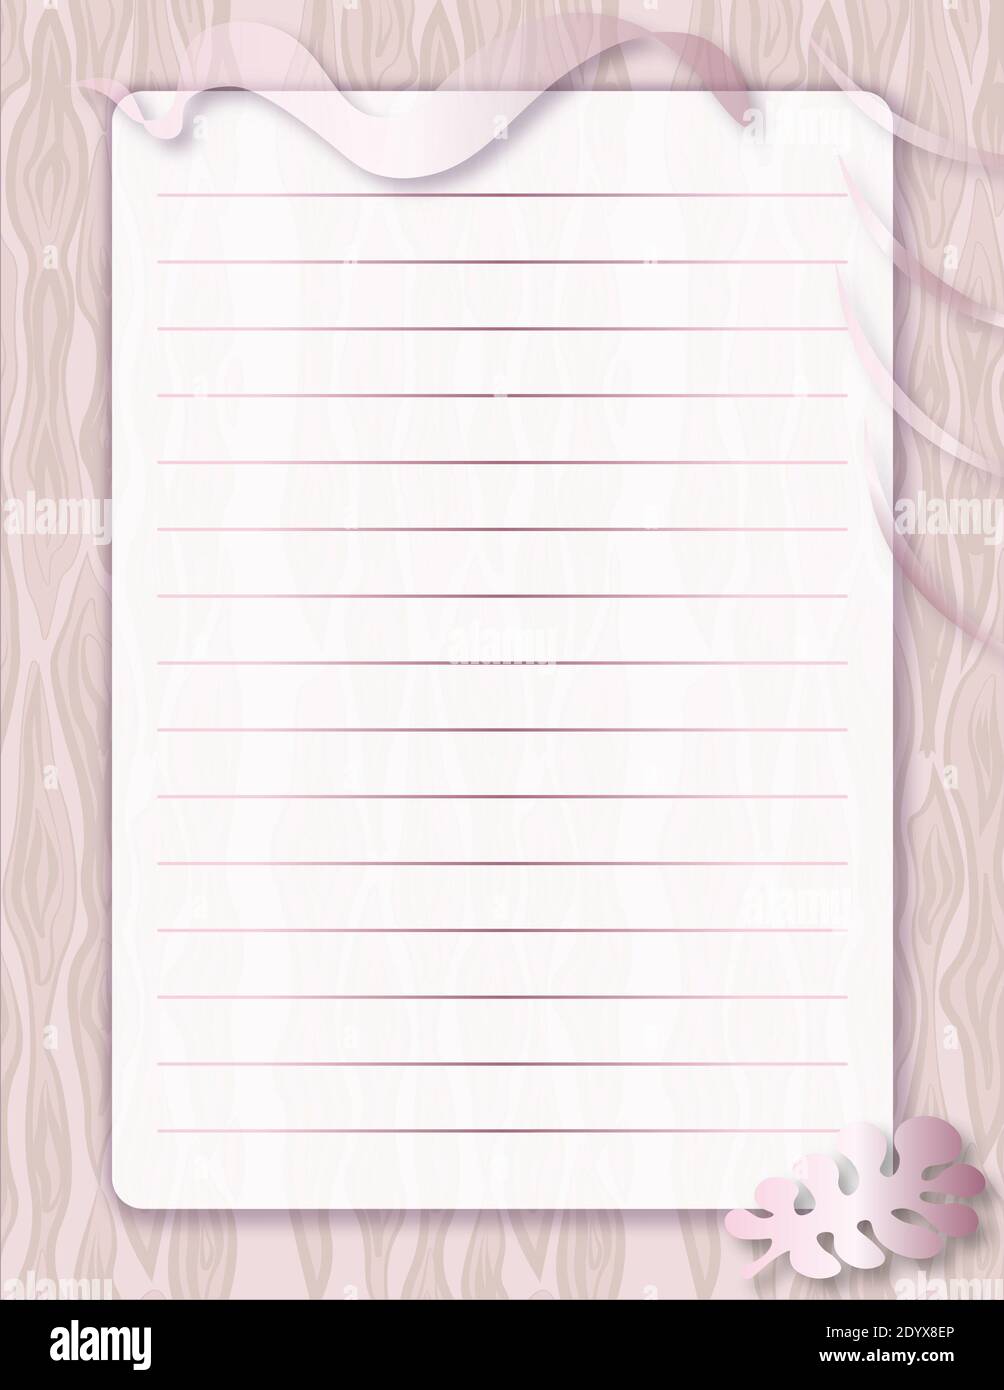 Lined Letter Paper JW. Letterhead with a beautiful design frame